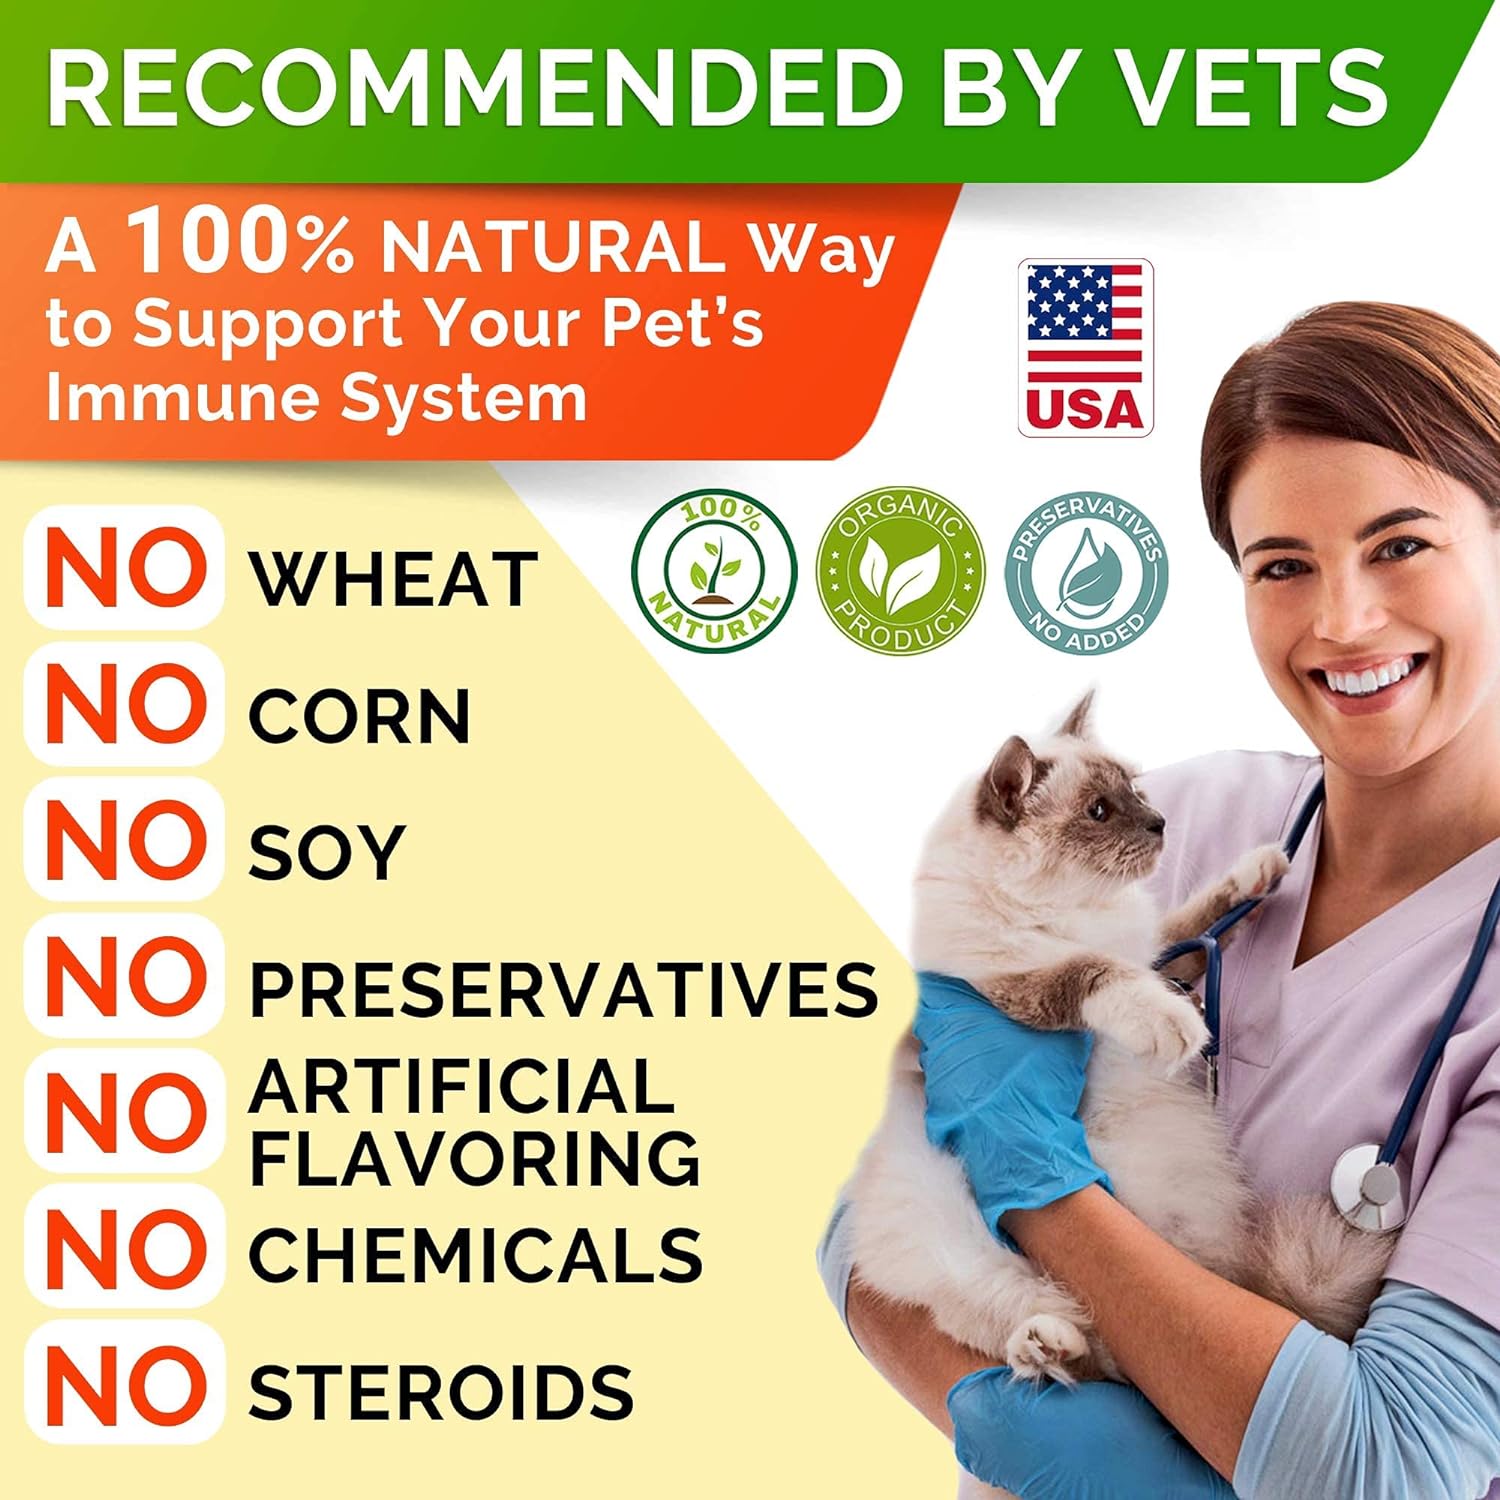 Probiotics Powder for Cats and Dogs - All Natural Supplement - Digestive Enzymes + Prebiotics - Relieves Diarrhea, Upset Stomach, Gas, Constipation, Litter Box Smell, Skin Allergy -4oz (Pack of 2) : Pet Supplies